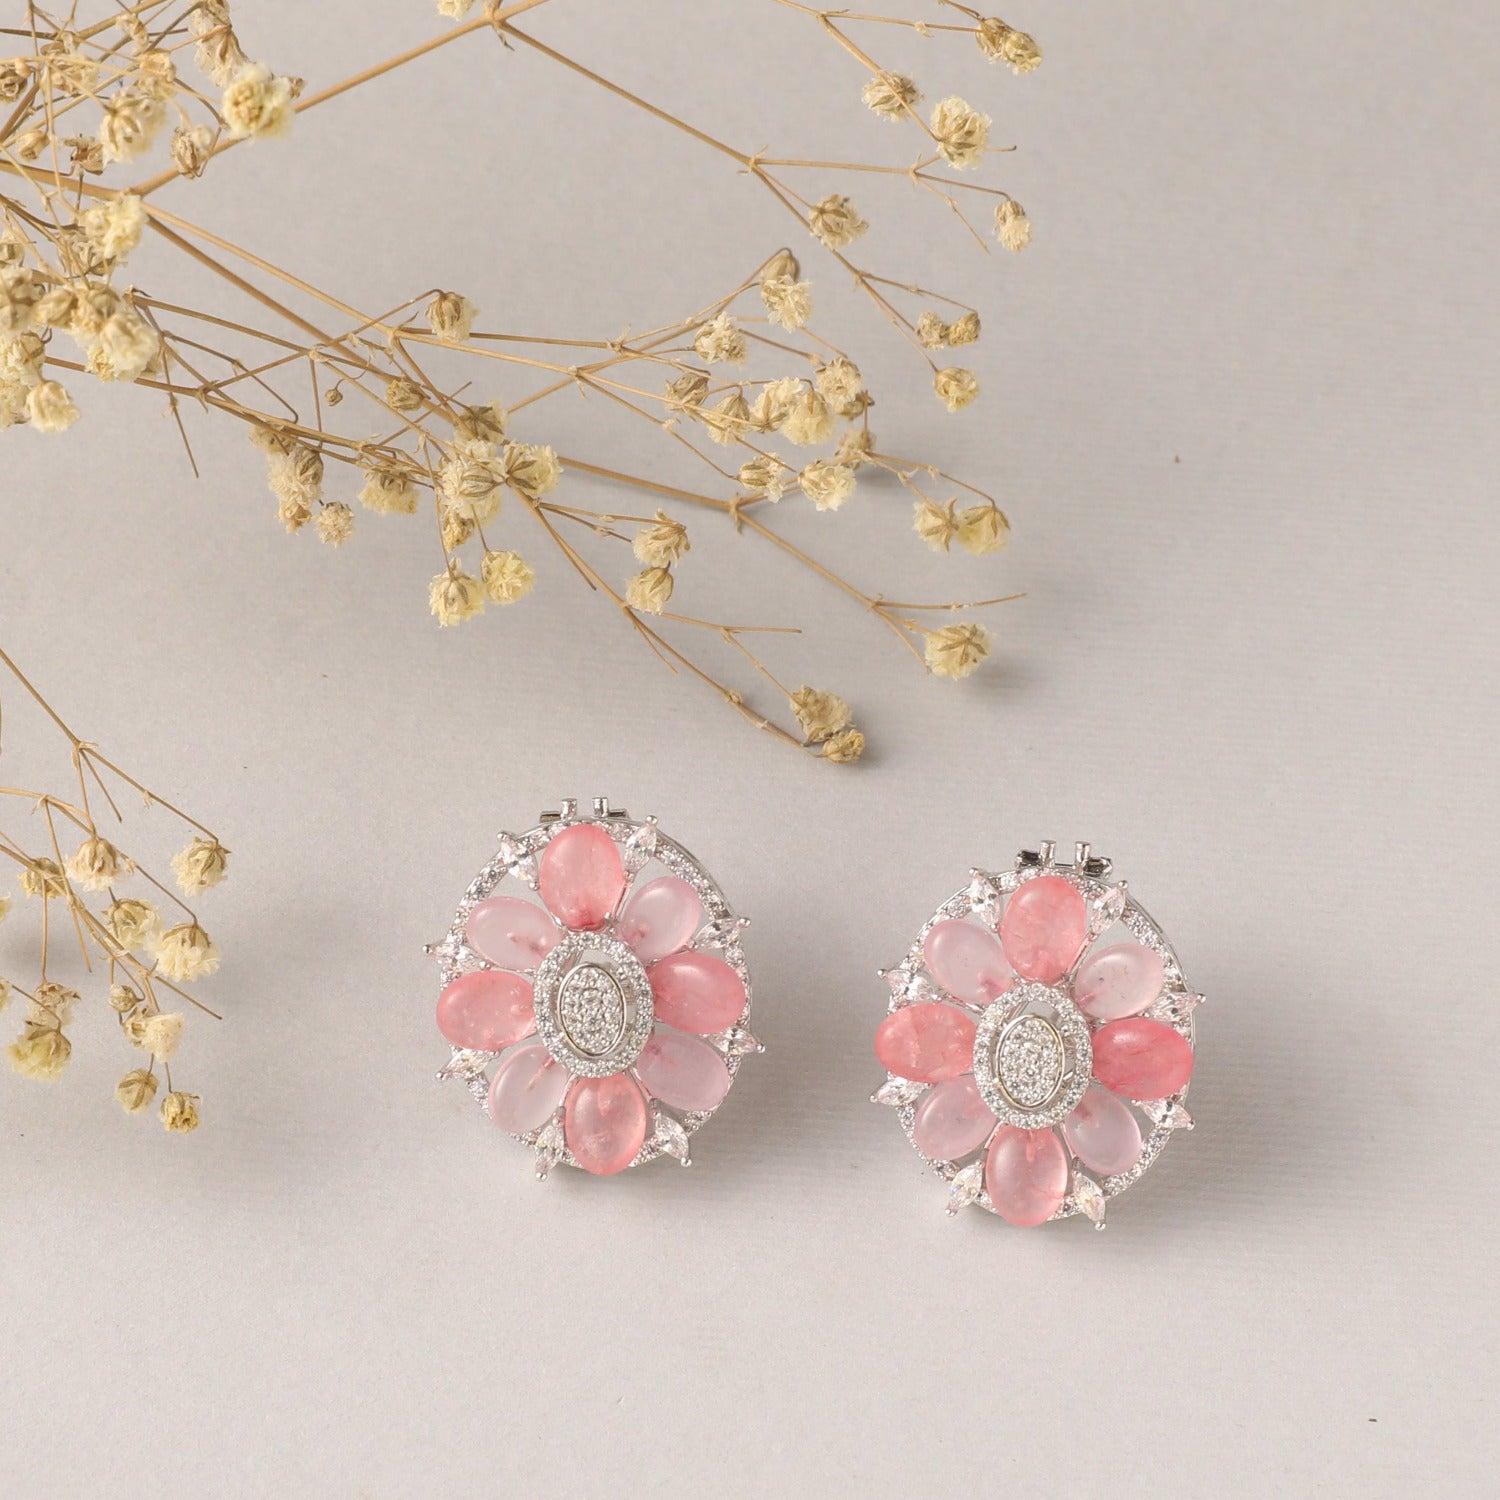 Aggregate more than 240 pink floral earrings